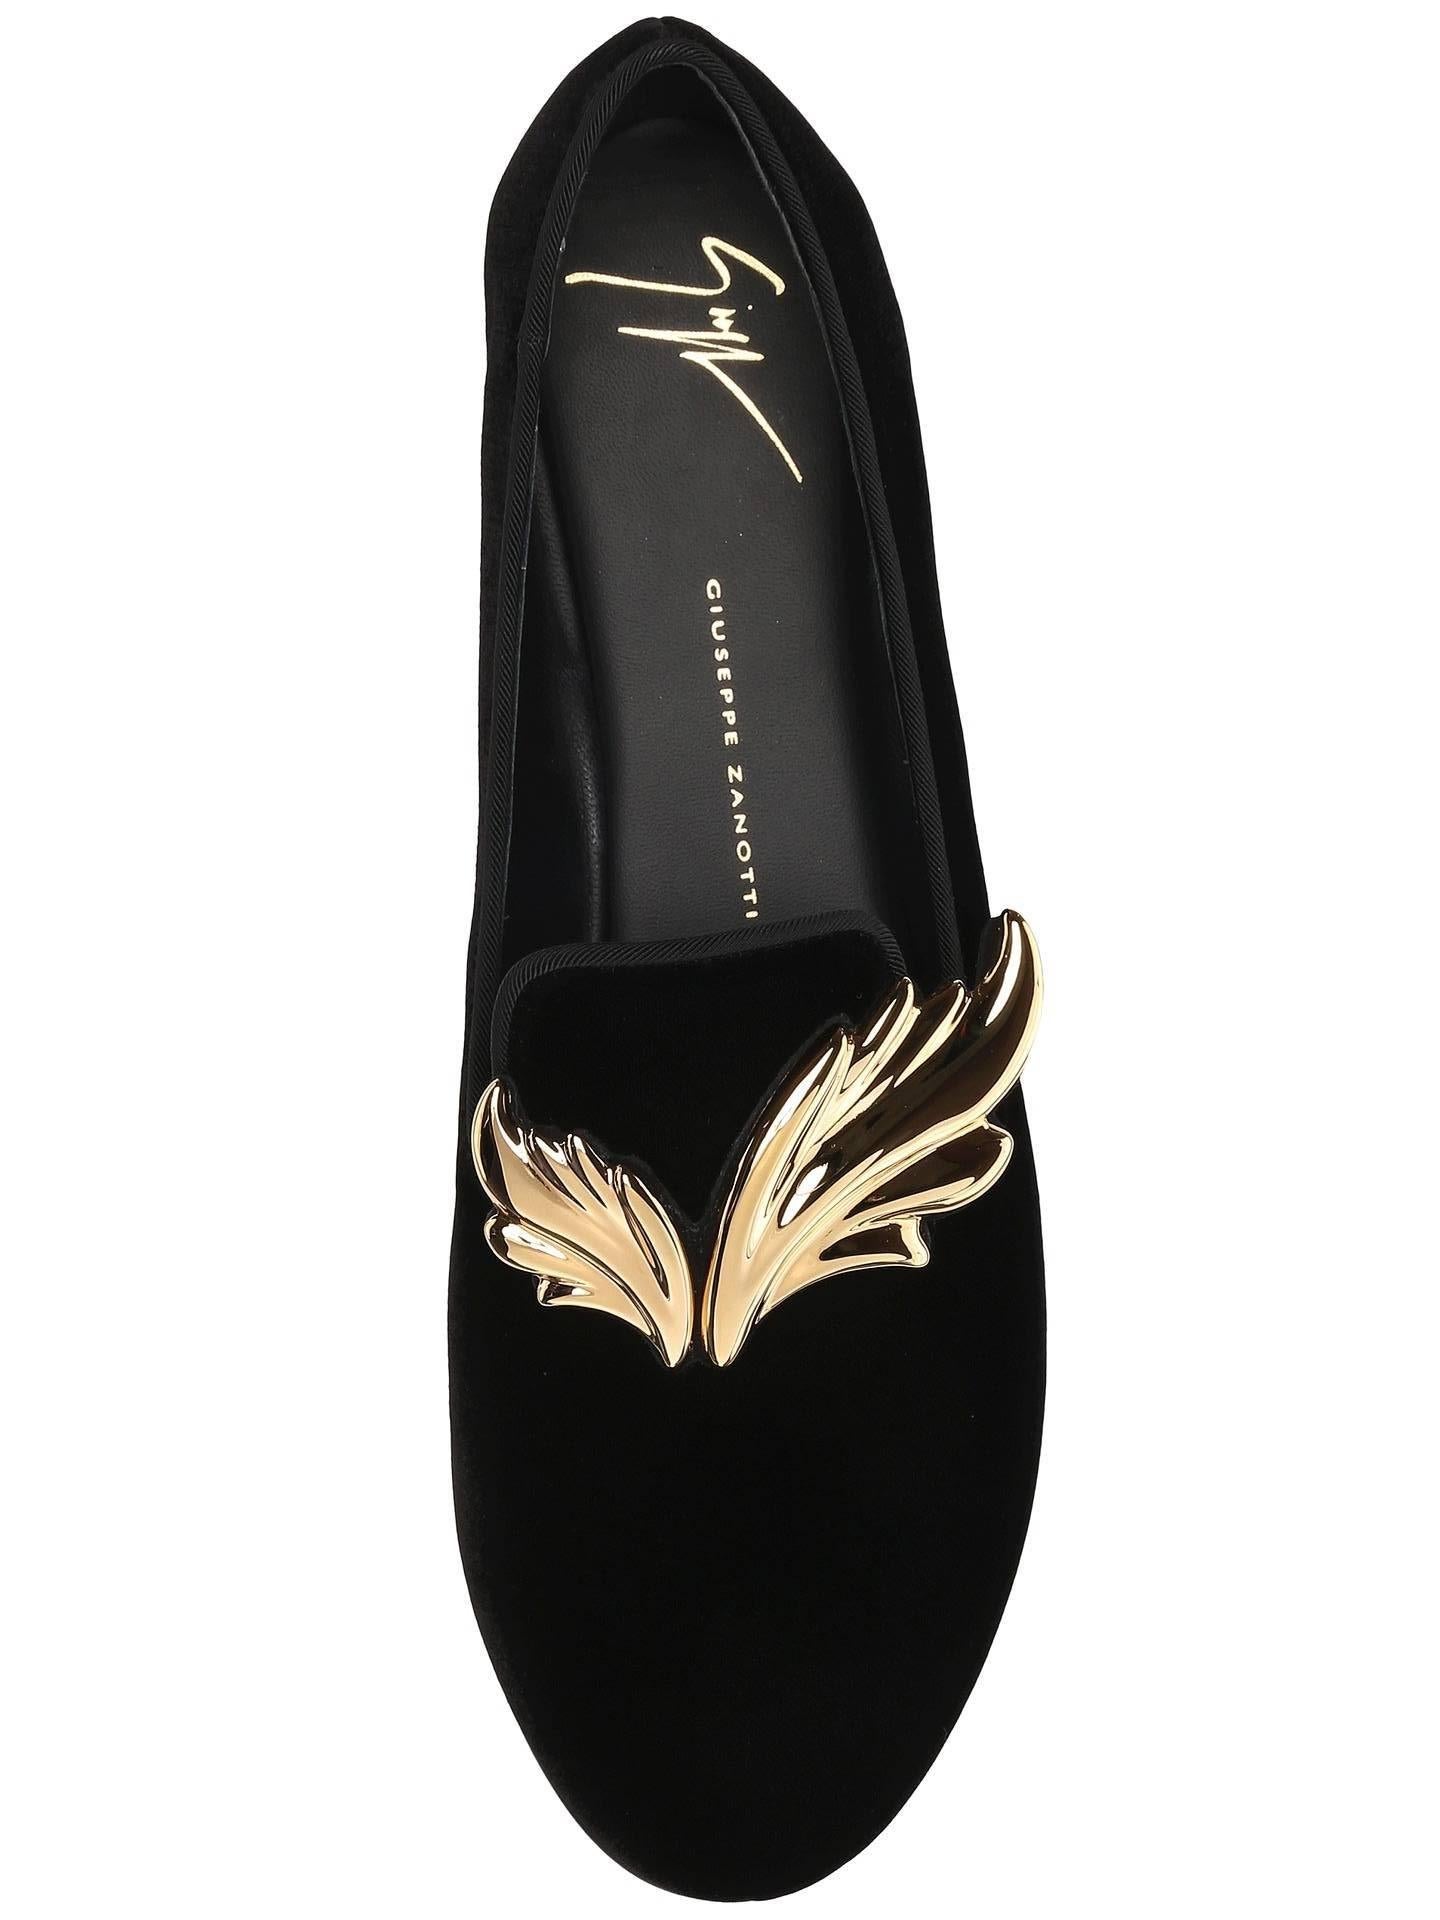 CURATOR'S NOTES

WOW!  Lowest price reduction for a limited time only!

Size 37.5
Velvet
Metal
Gold tone
Slip on 
Made in Italy.
Heel heigh 0.50"
Includes original Giuseppe Zanotti box
